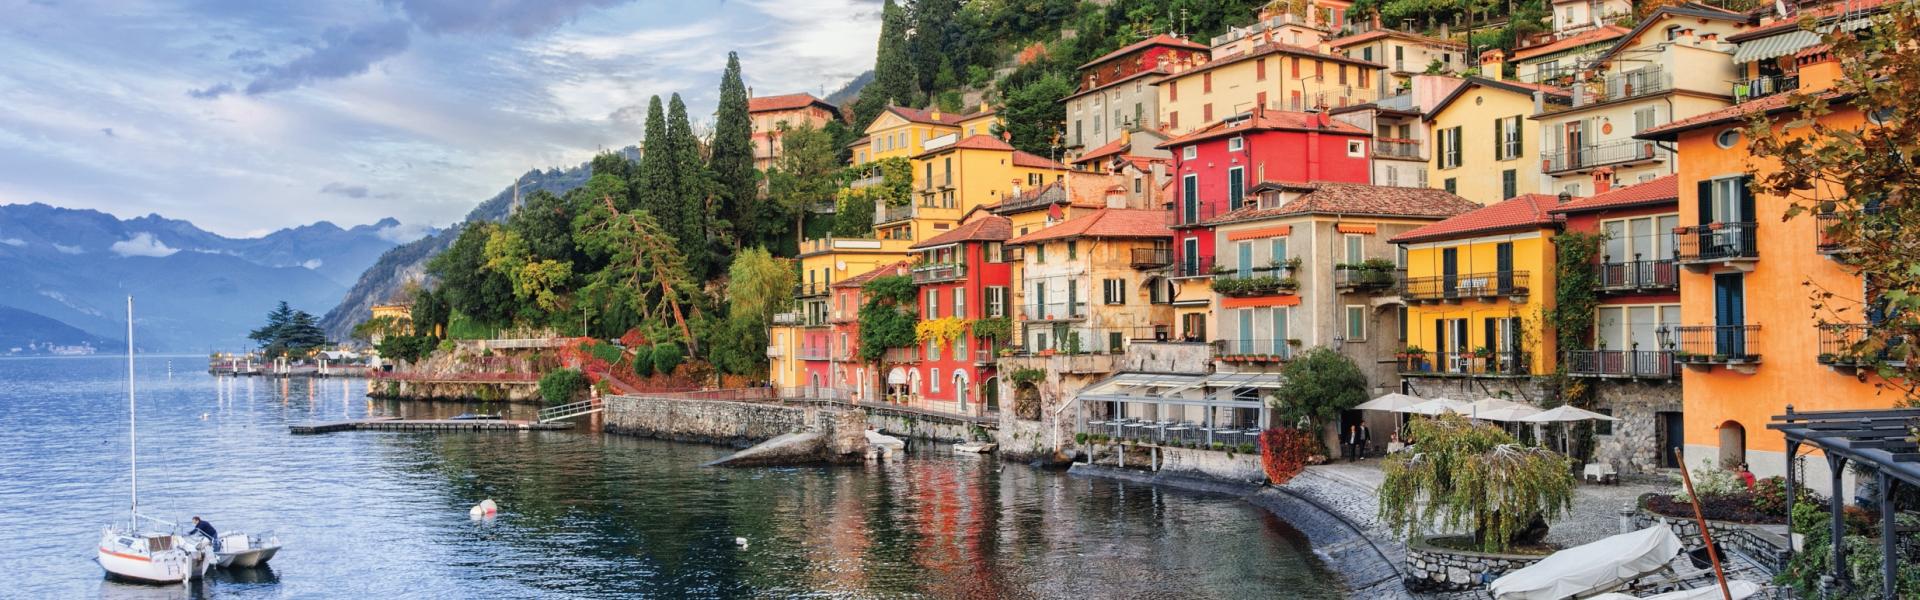 Find the ideal holiday home in Lake Como for your Italian adventure - Casamundo